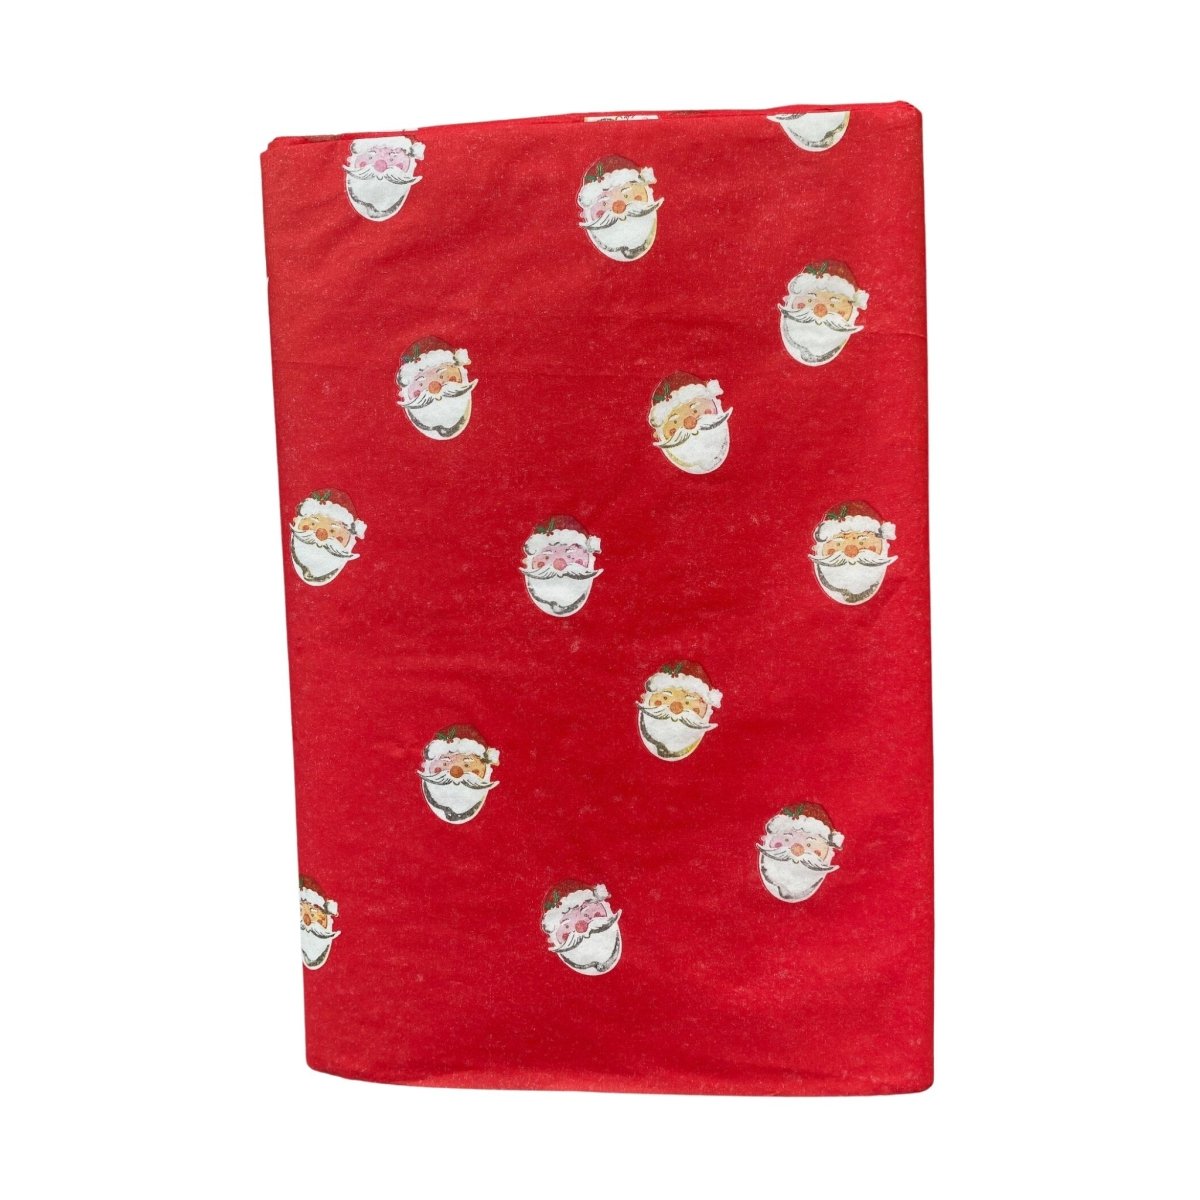 Santa Face Table Cover - Kids Party Craft